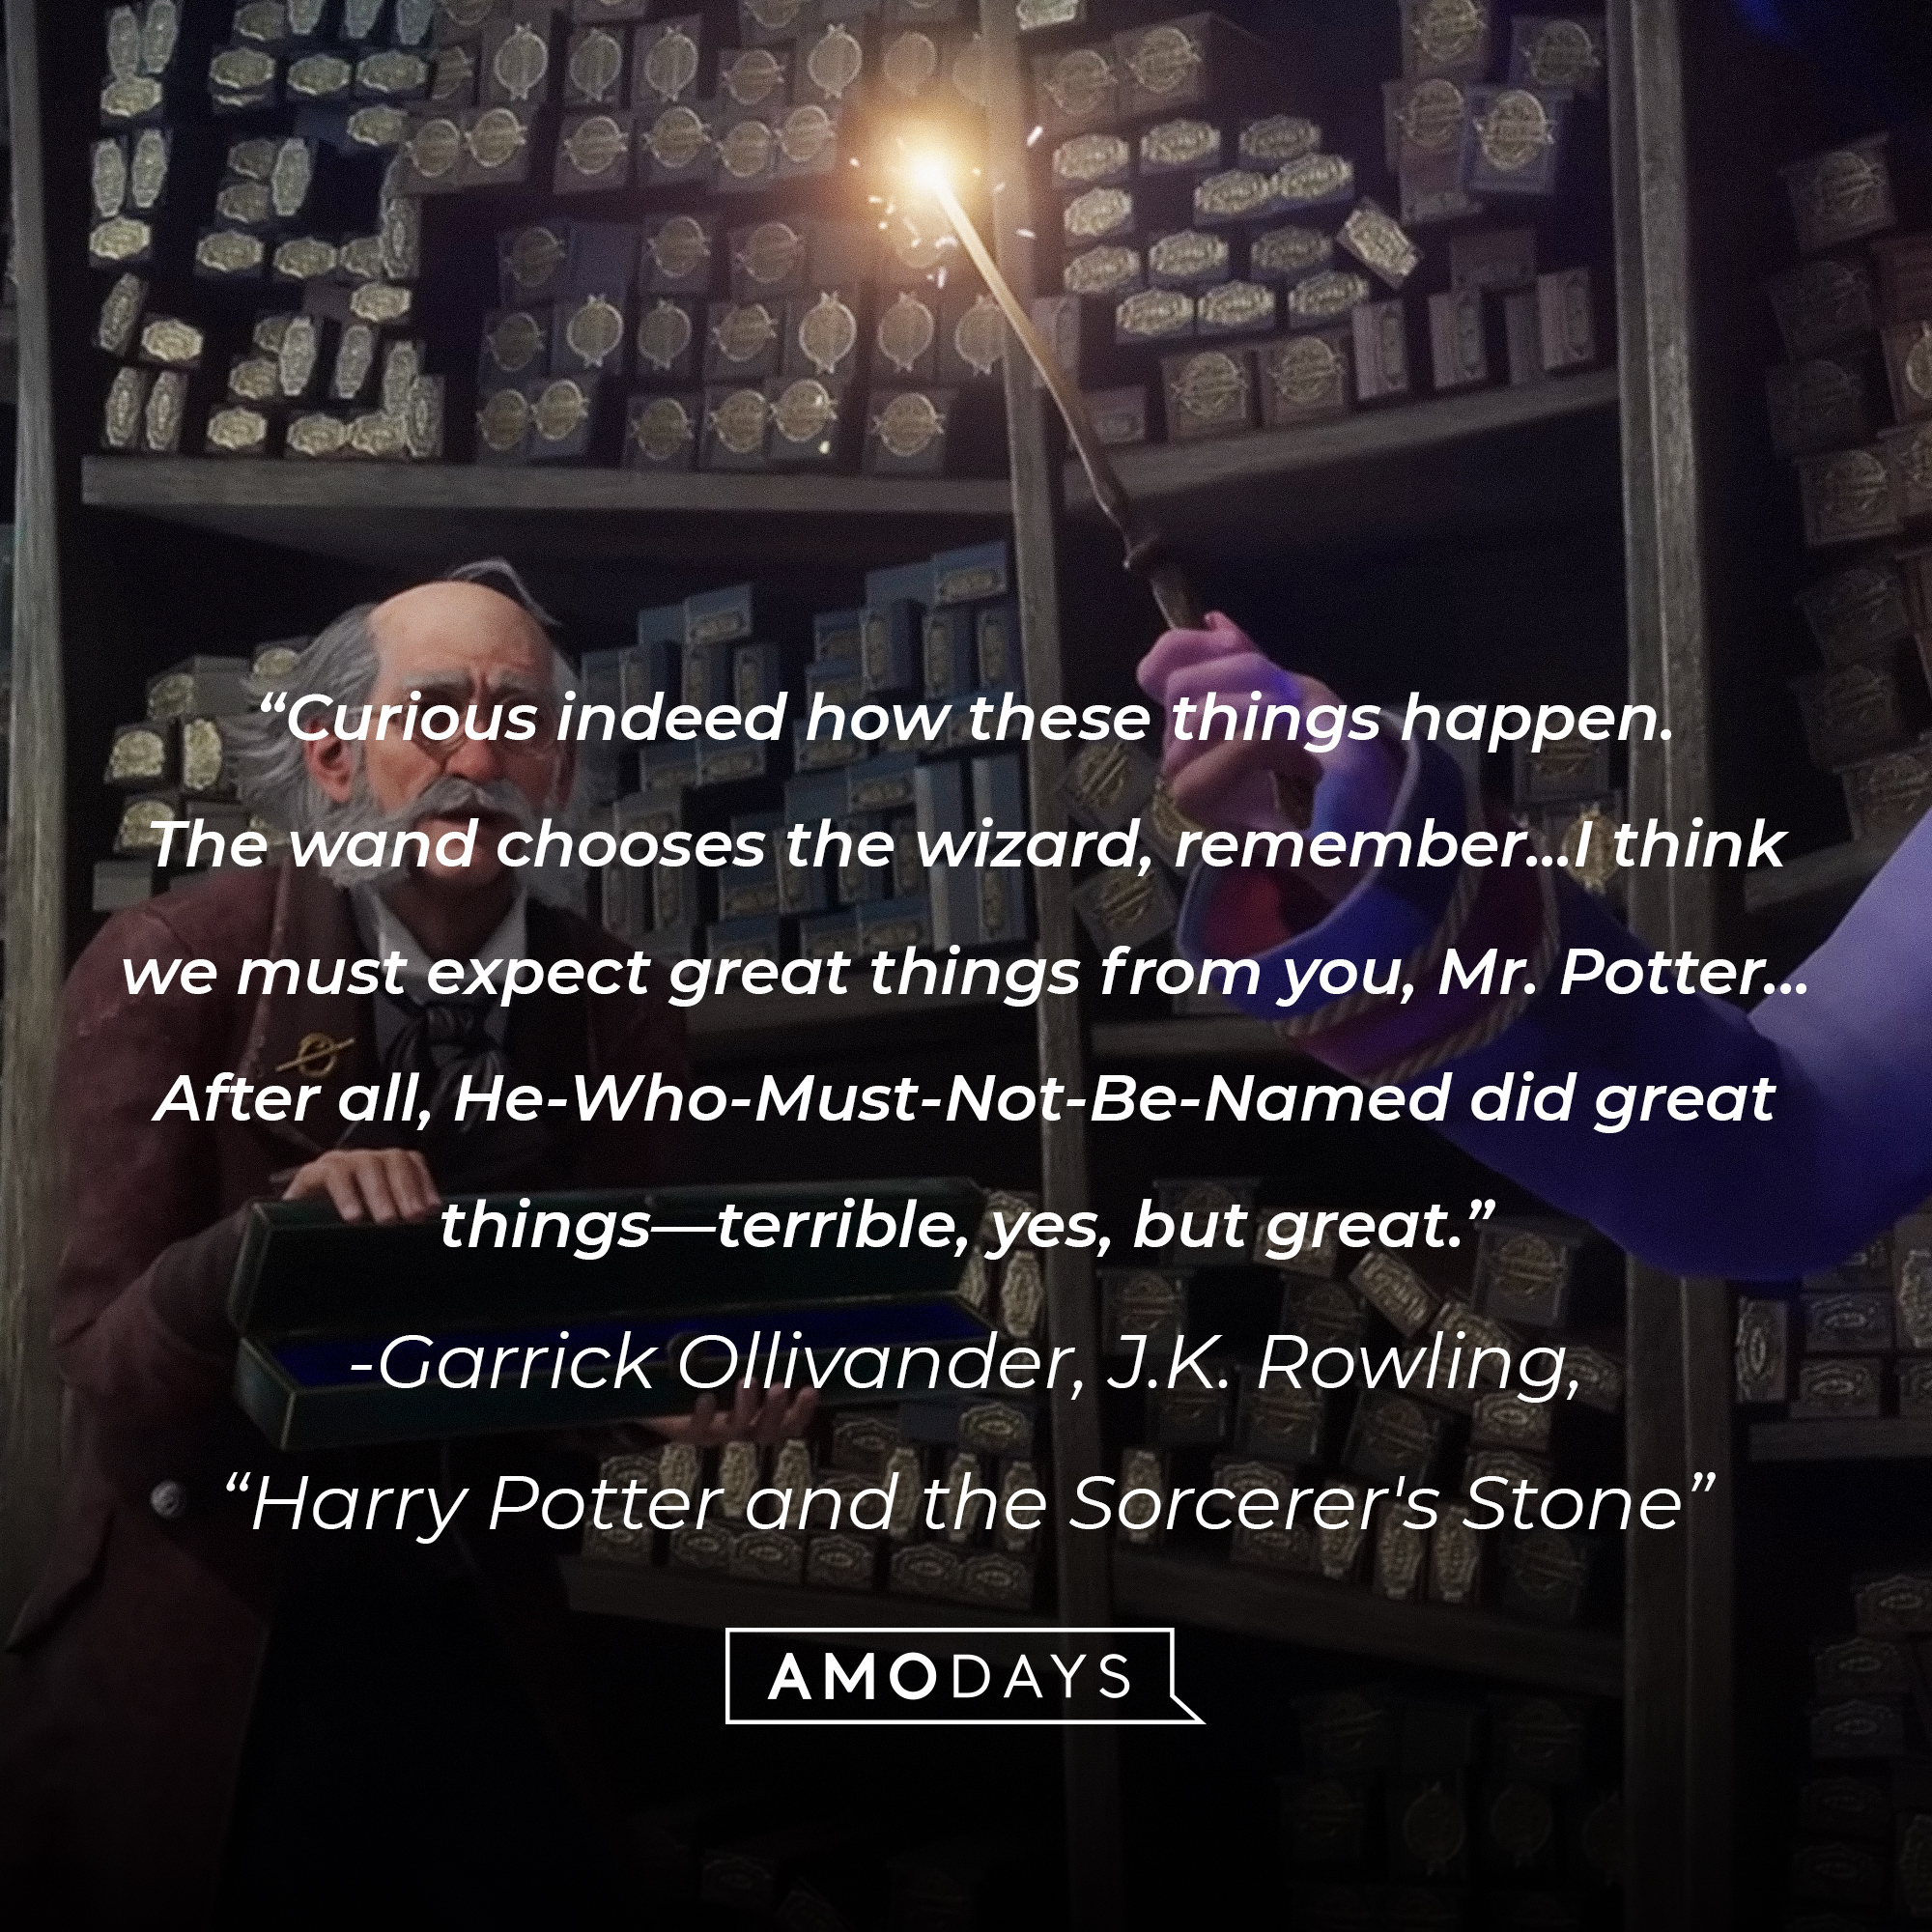 Garrick Ollivander’s quote from “Harry Potter and the Sorcerer’s Stone” | Source: youtube.com/HogwartsLegacy